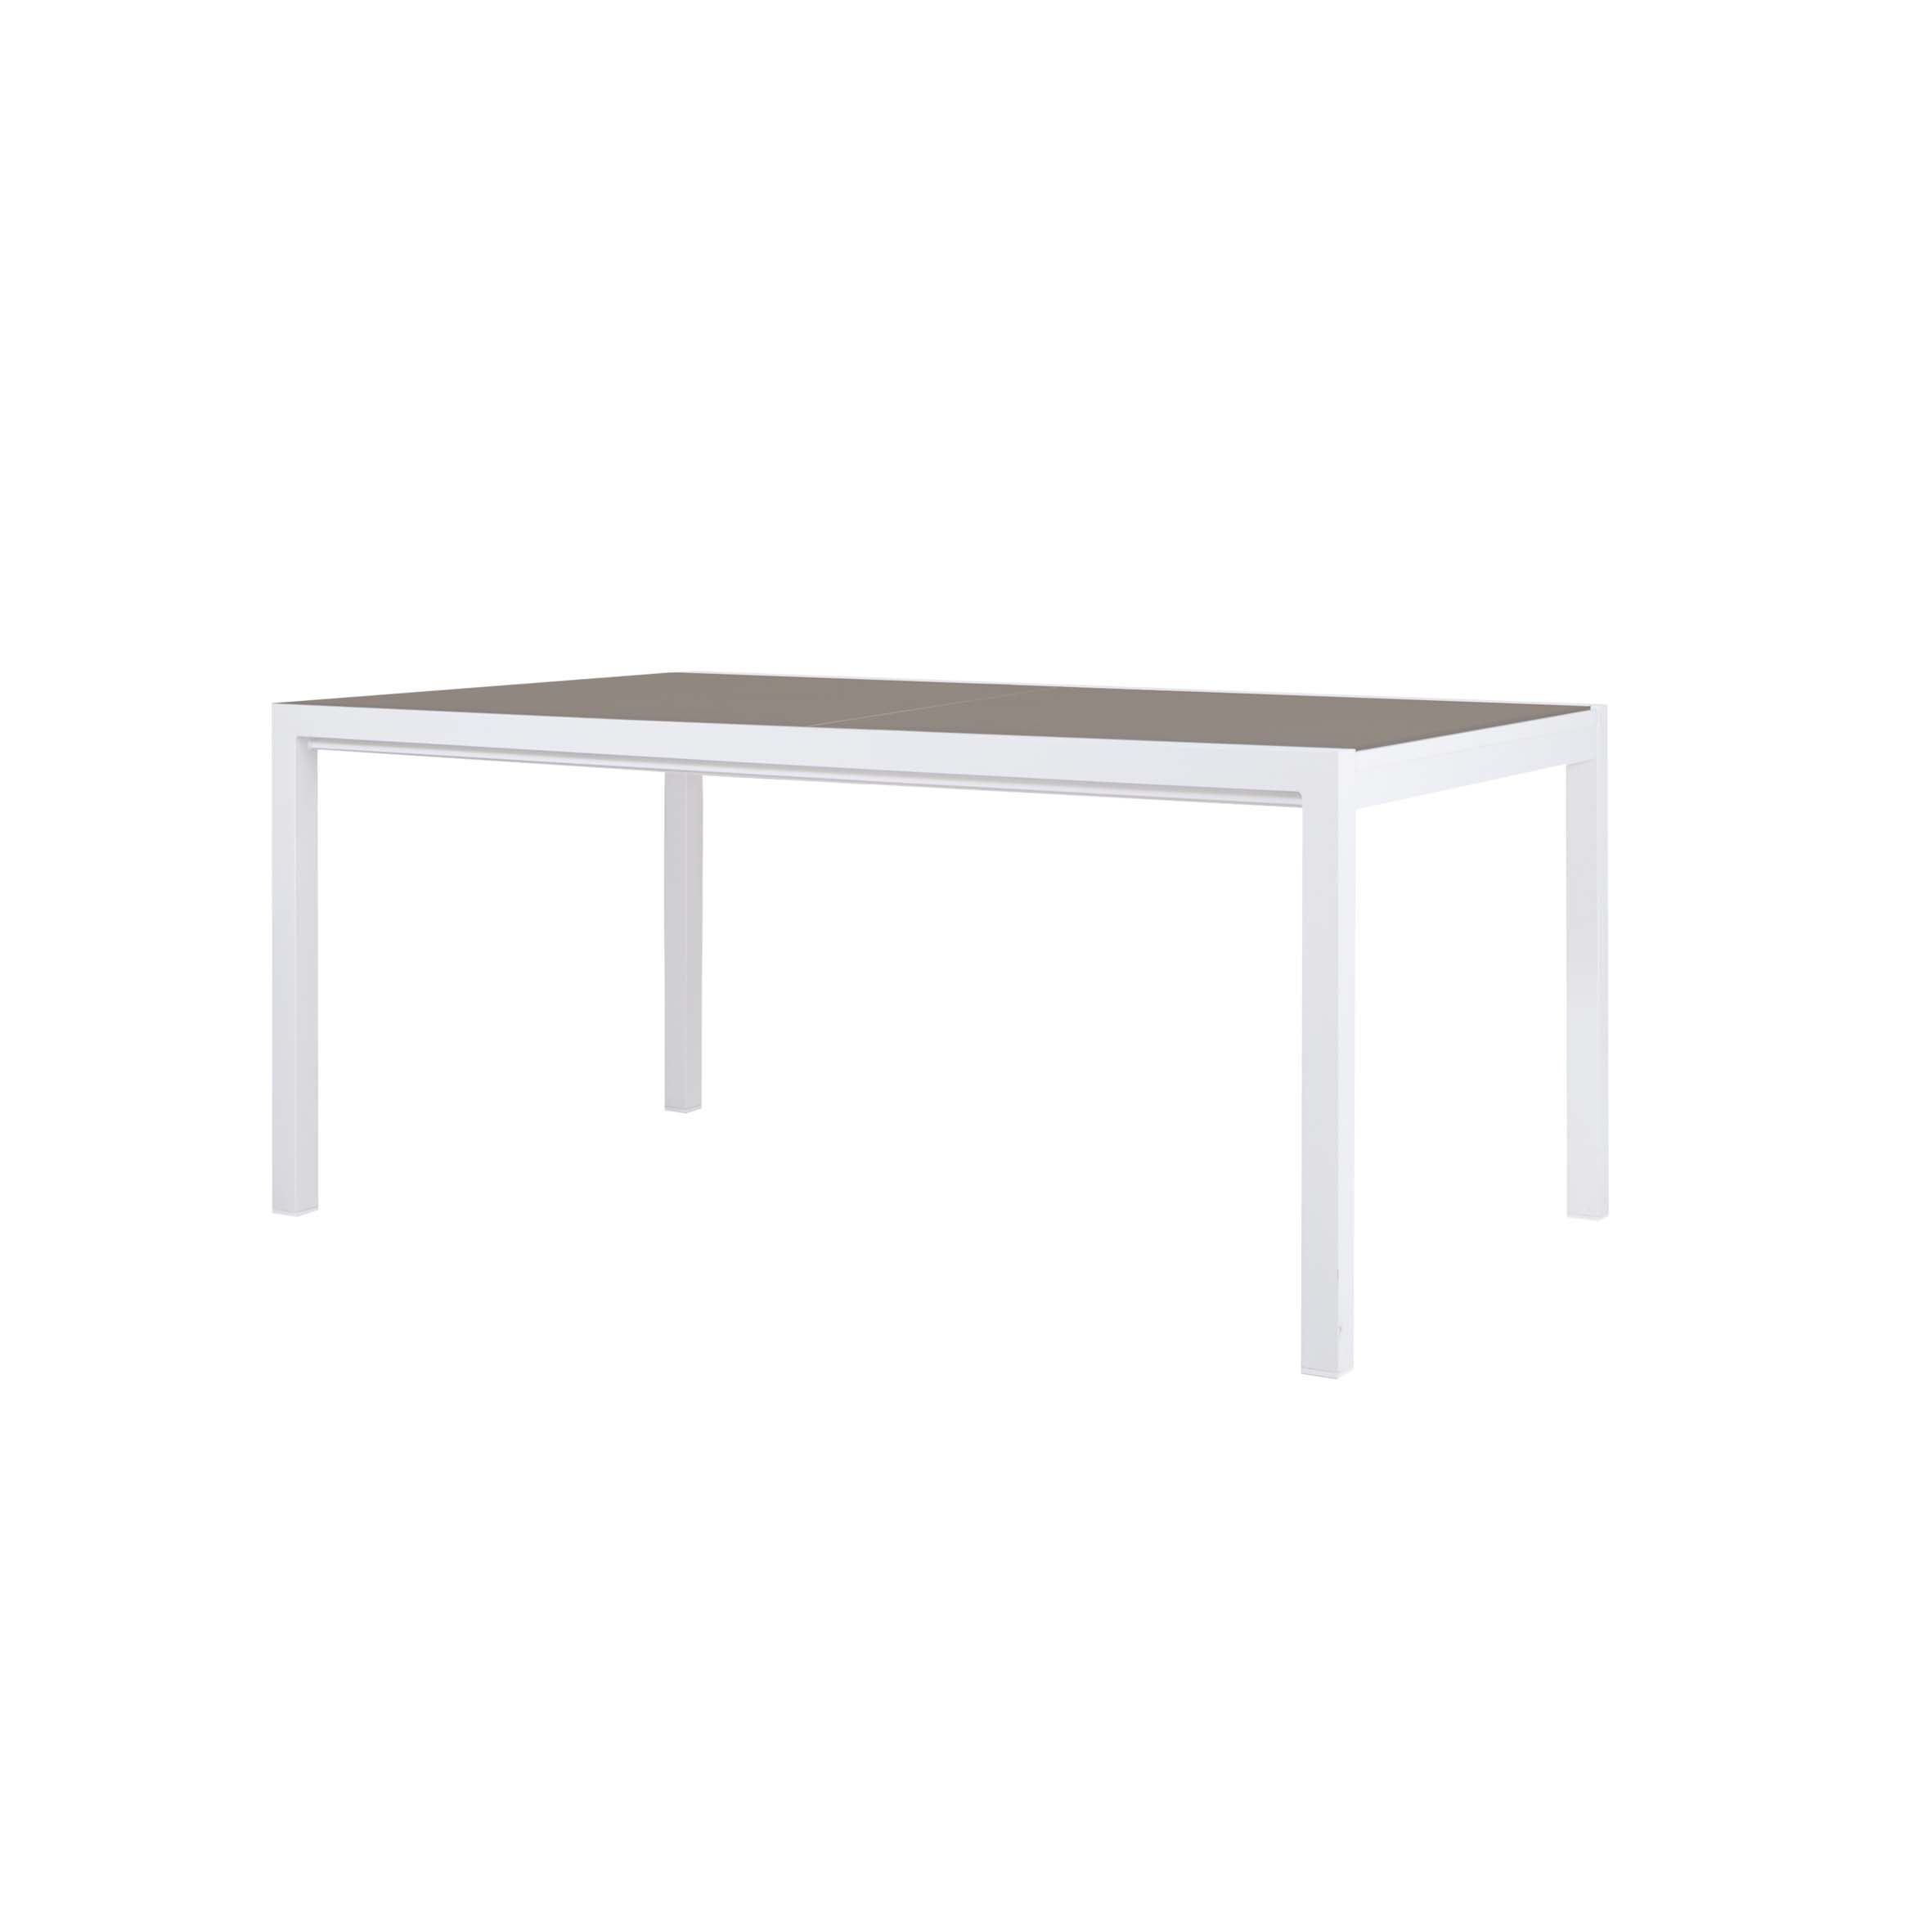 Kotka extension table S17